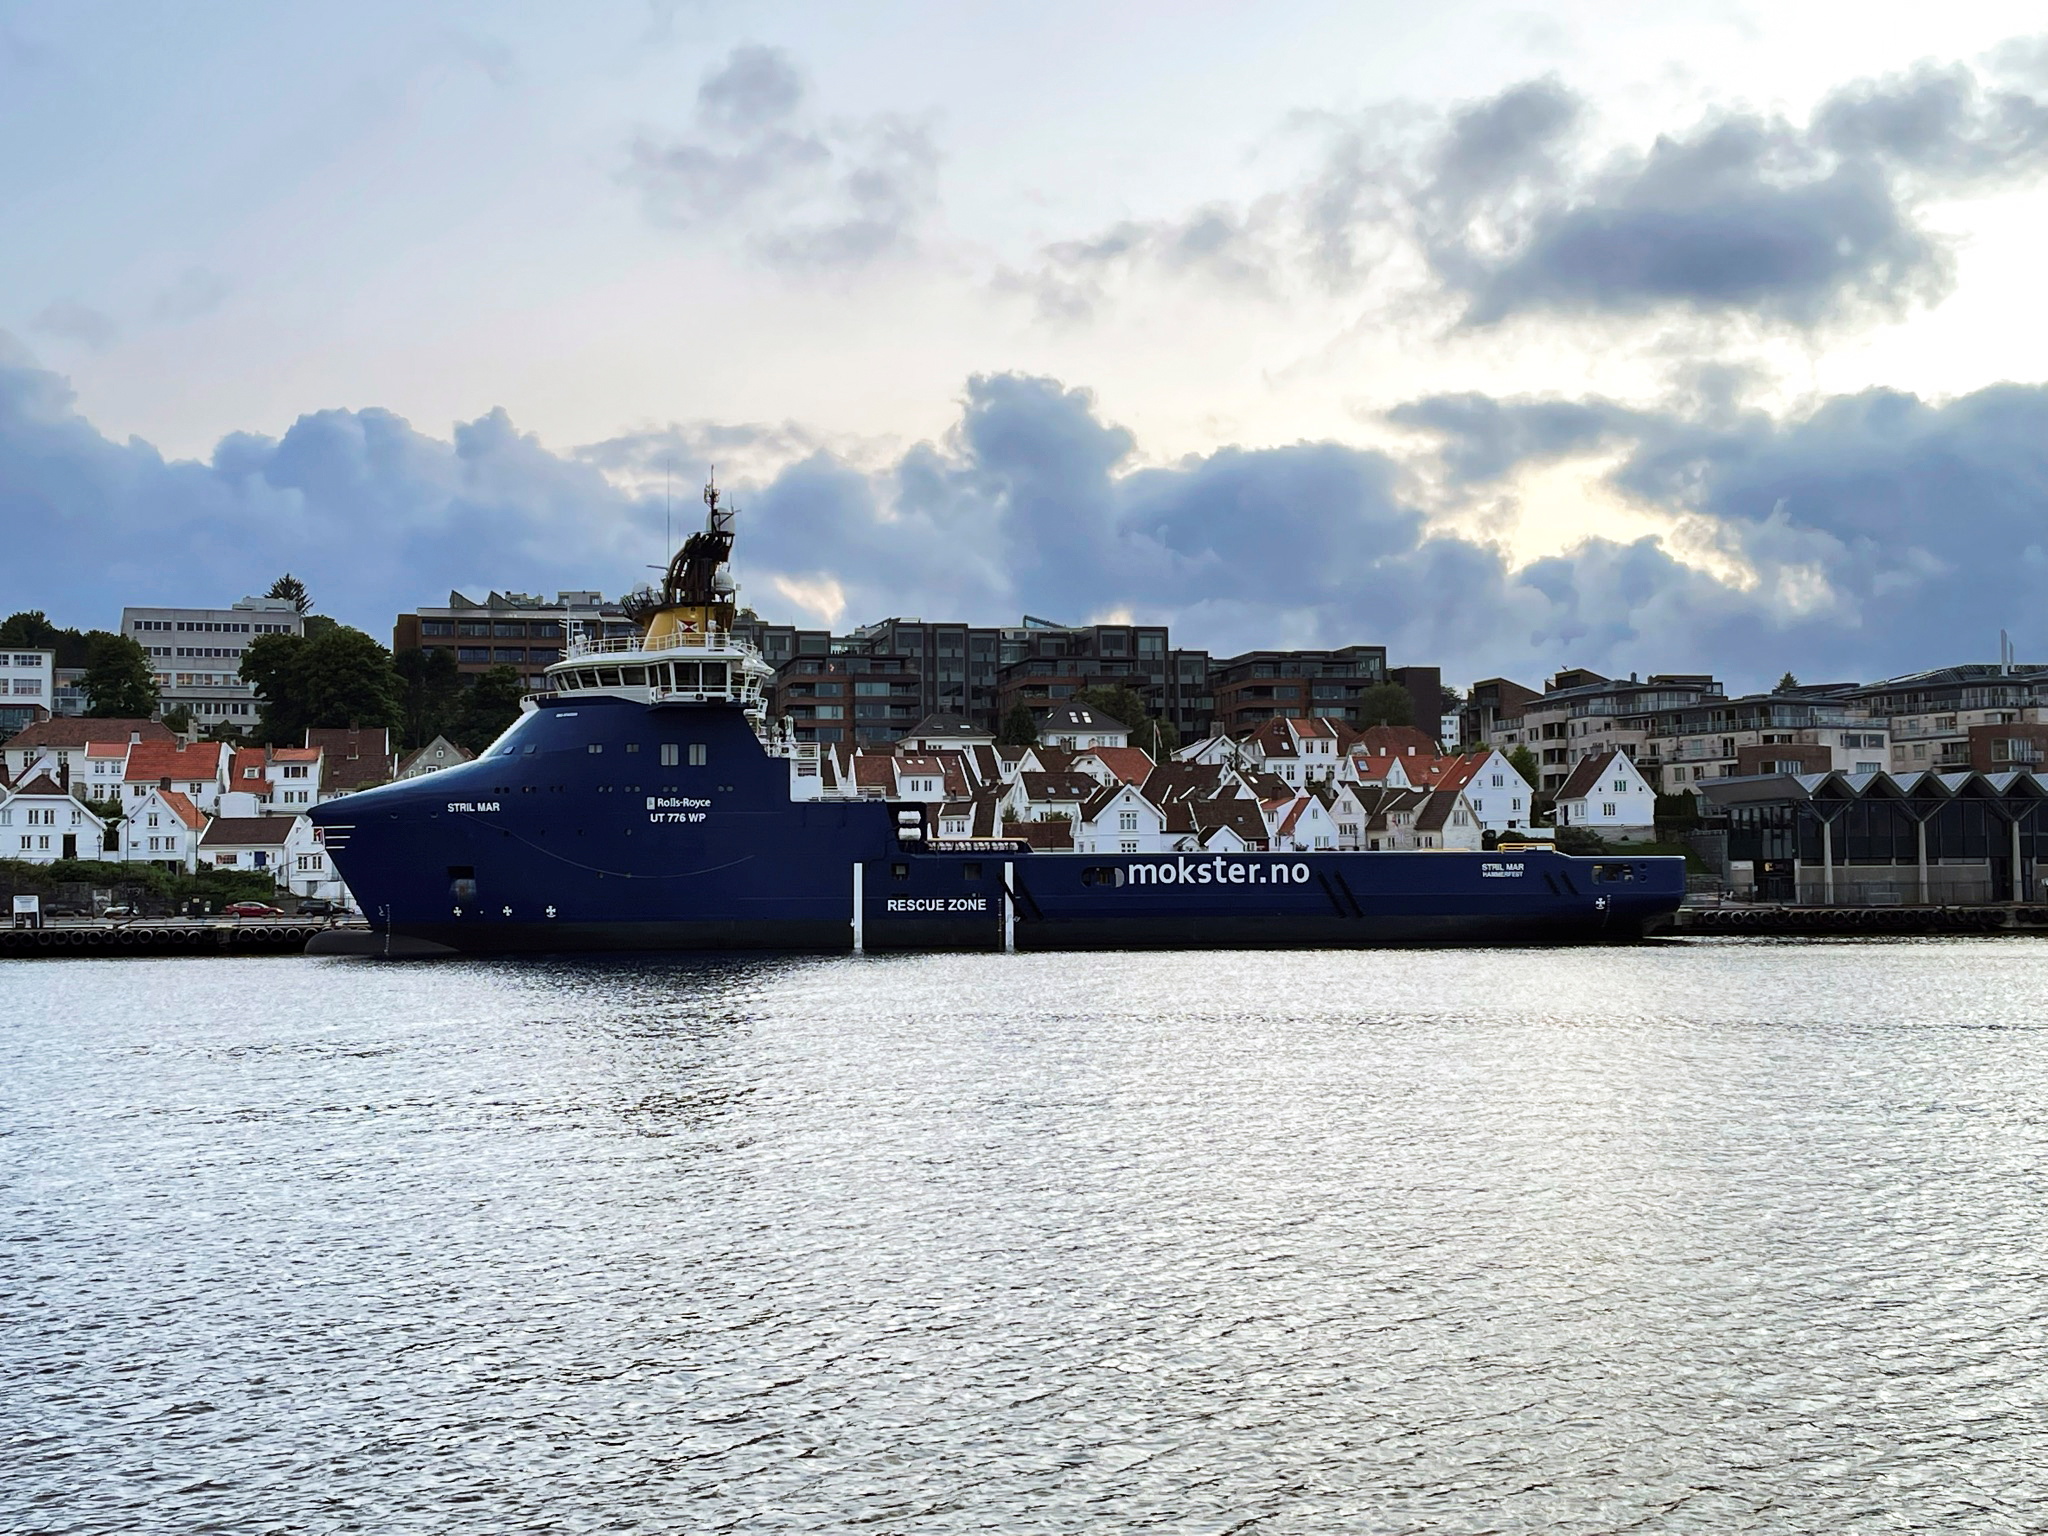 Offshore oil and gas platform supply vessel is docked at a pier in Stavanger